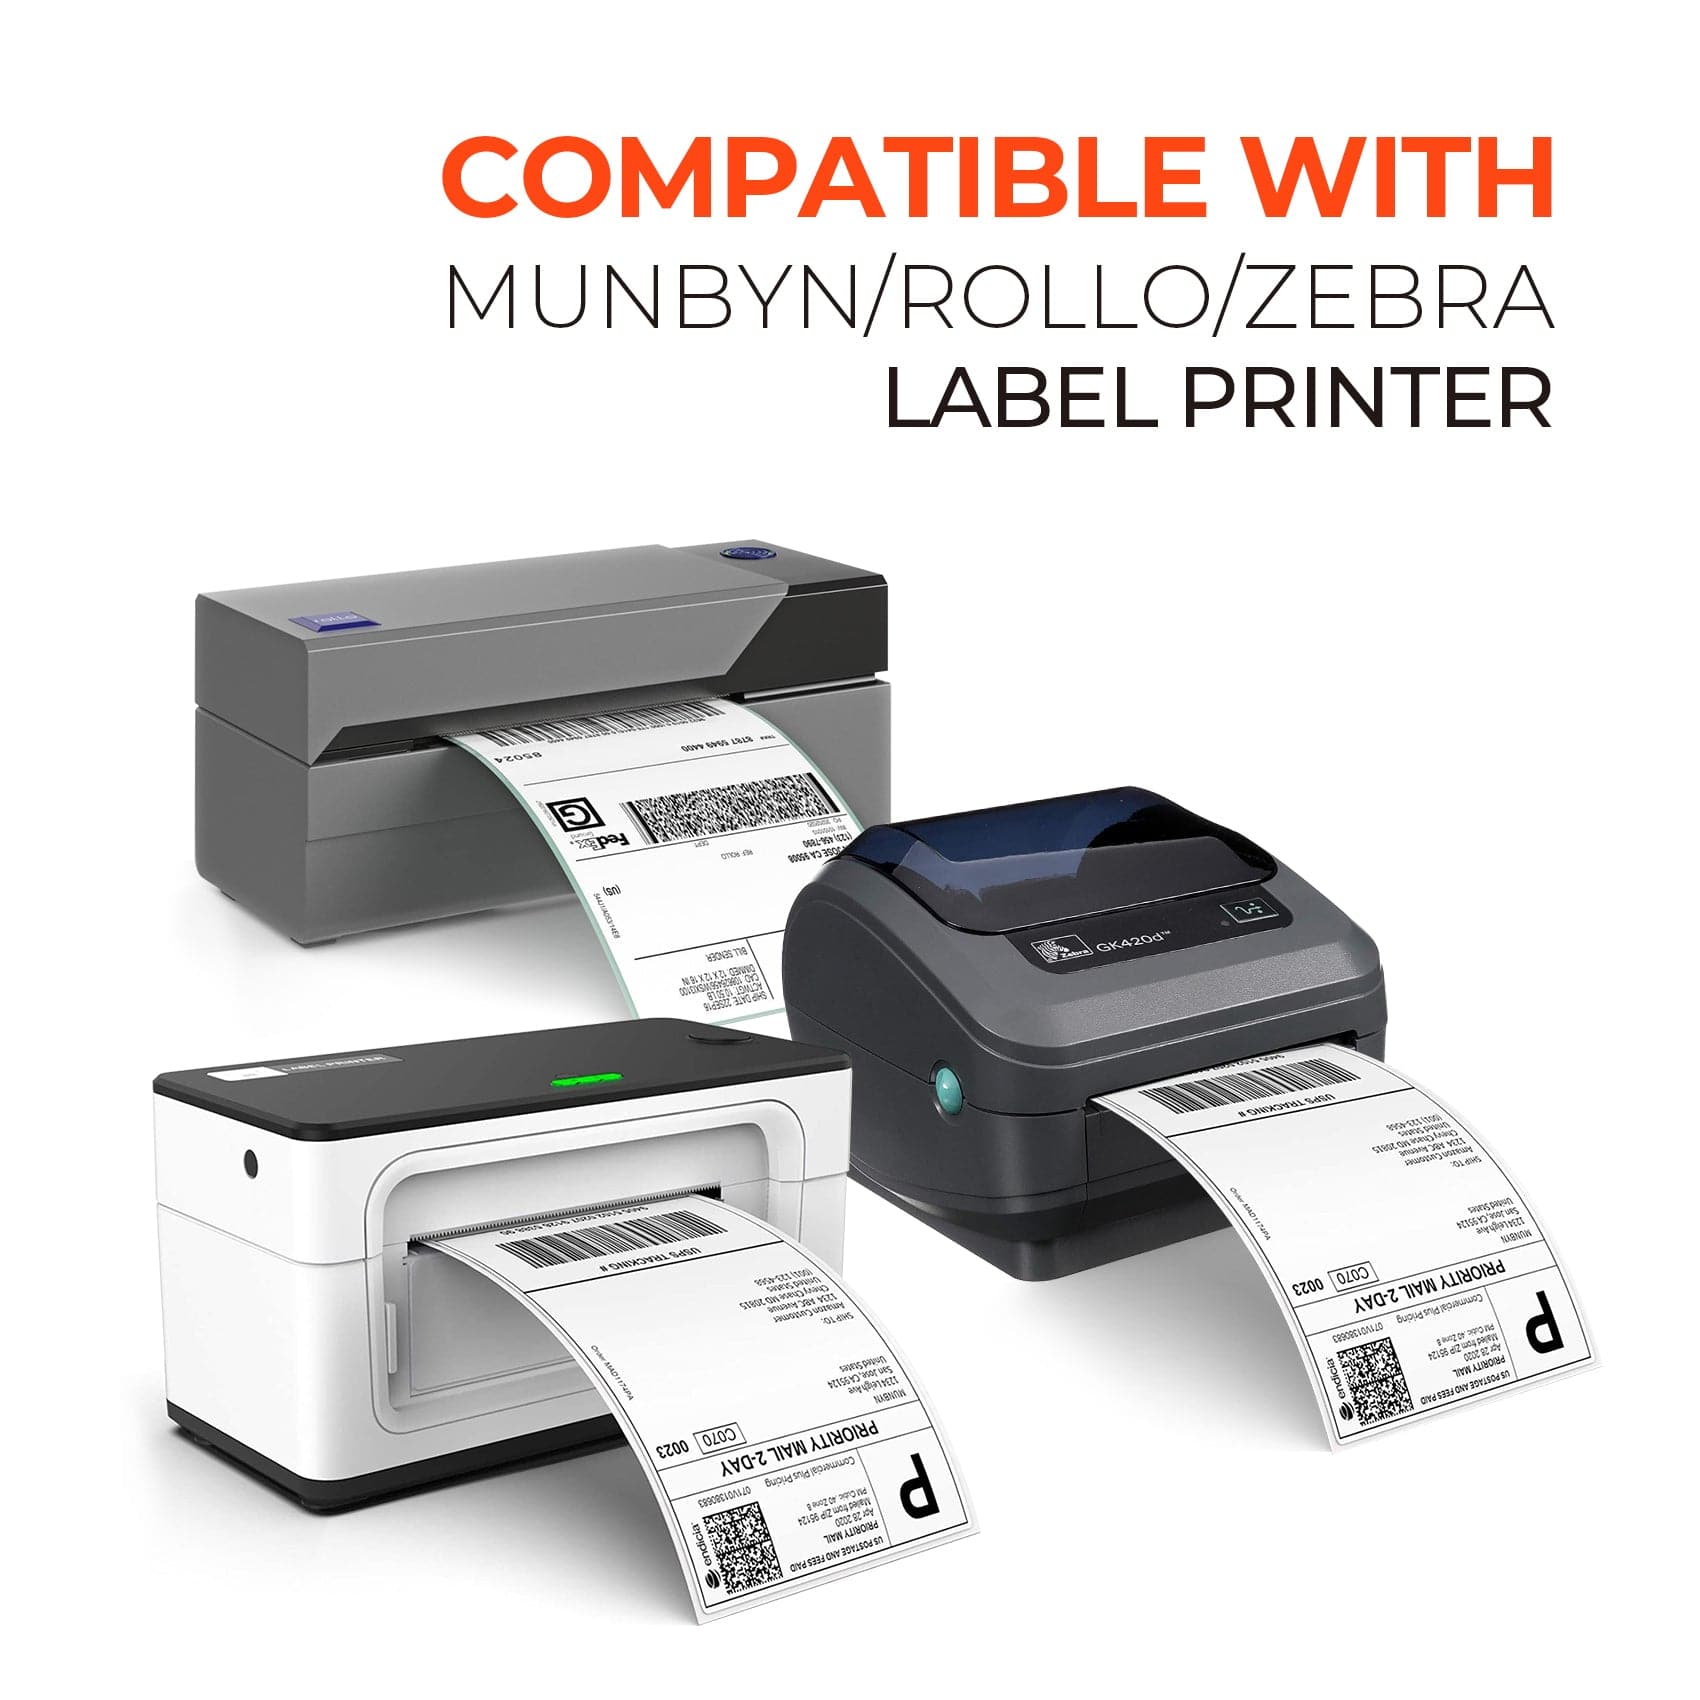 MUNBYN Thermal Shipping Label Printer USB 4X6 /Postal Scale 500/2000 Labels